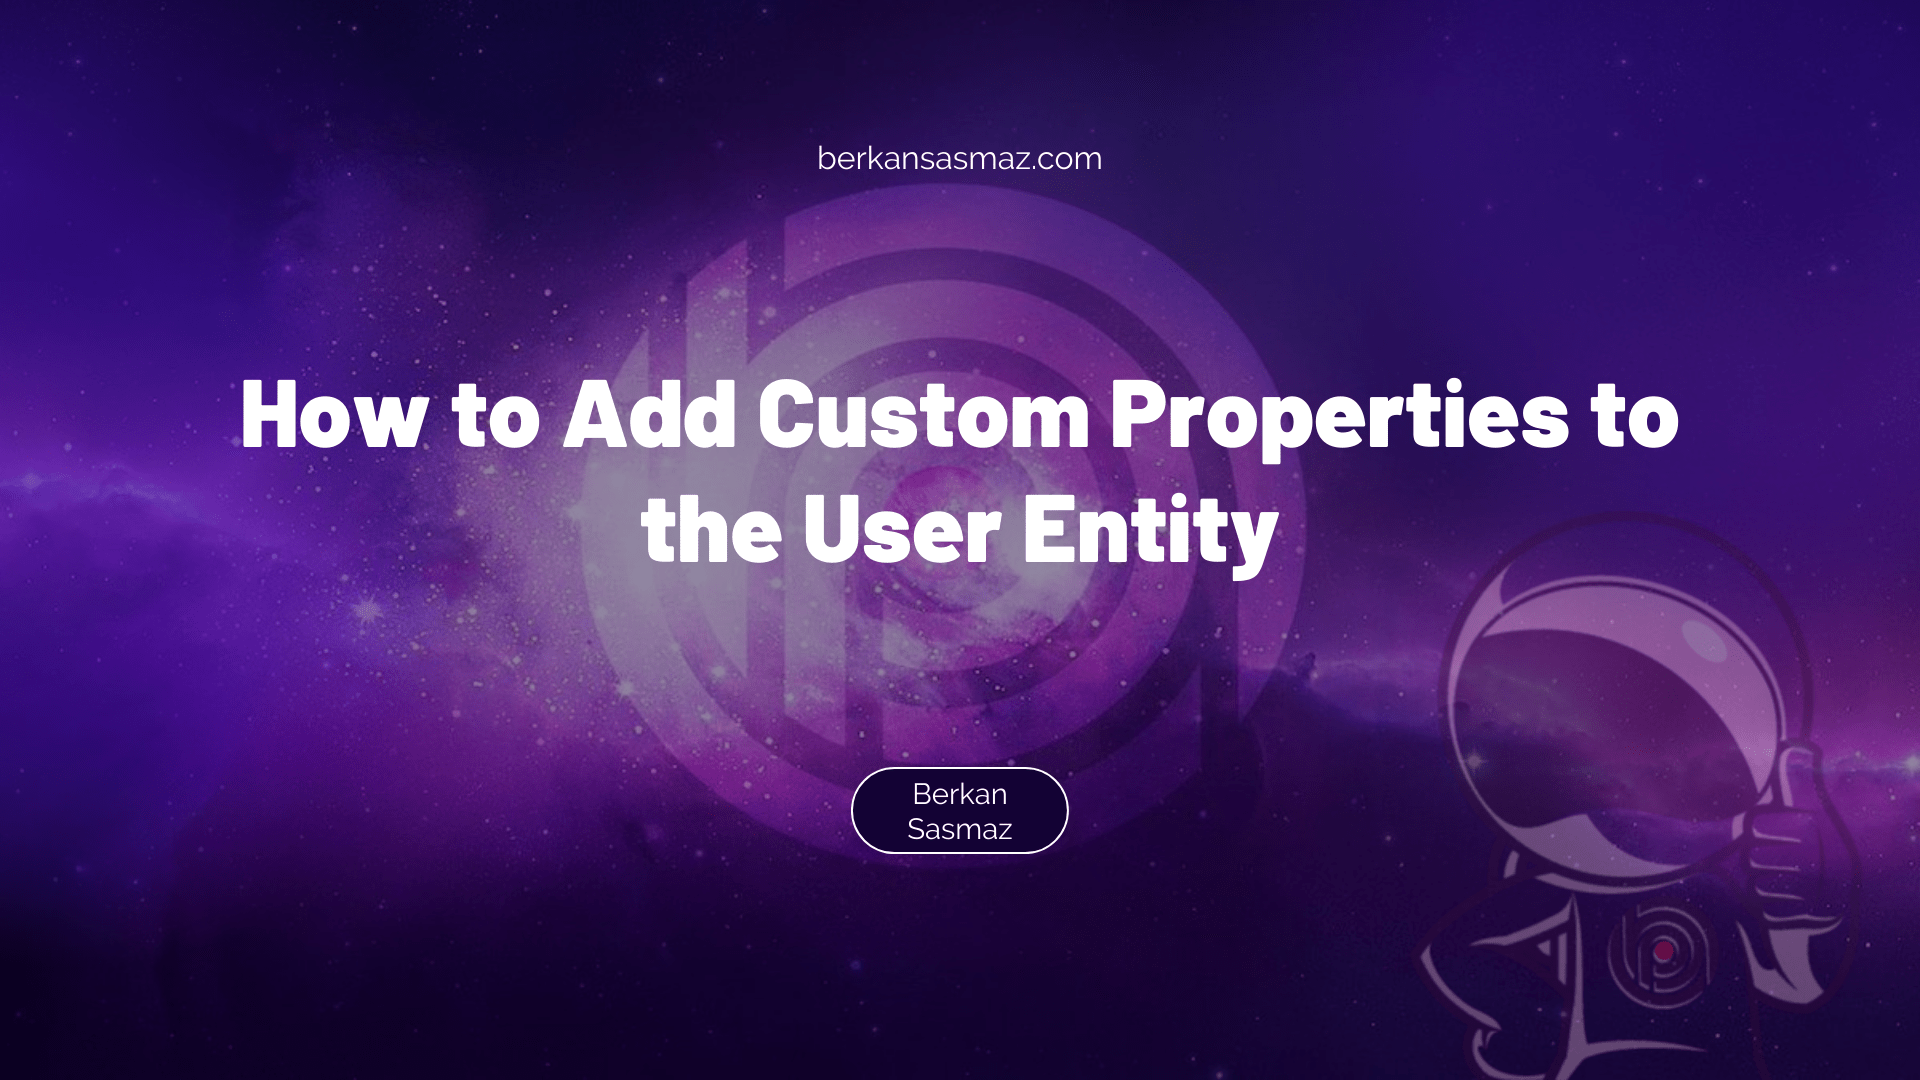 How to Add Custom Properties to the User Entity